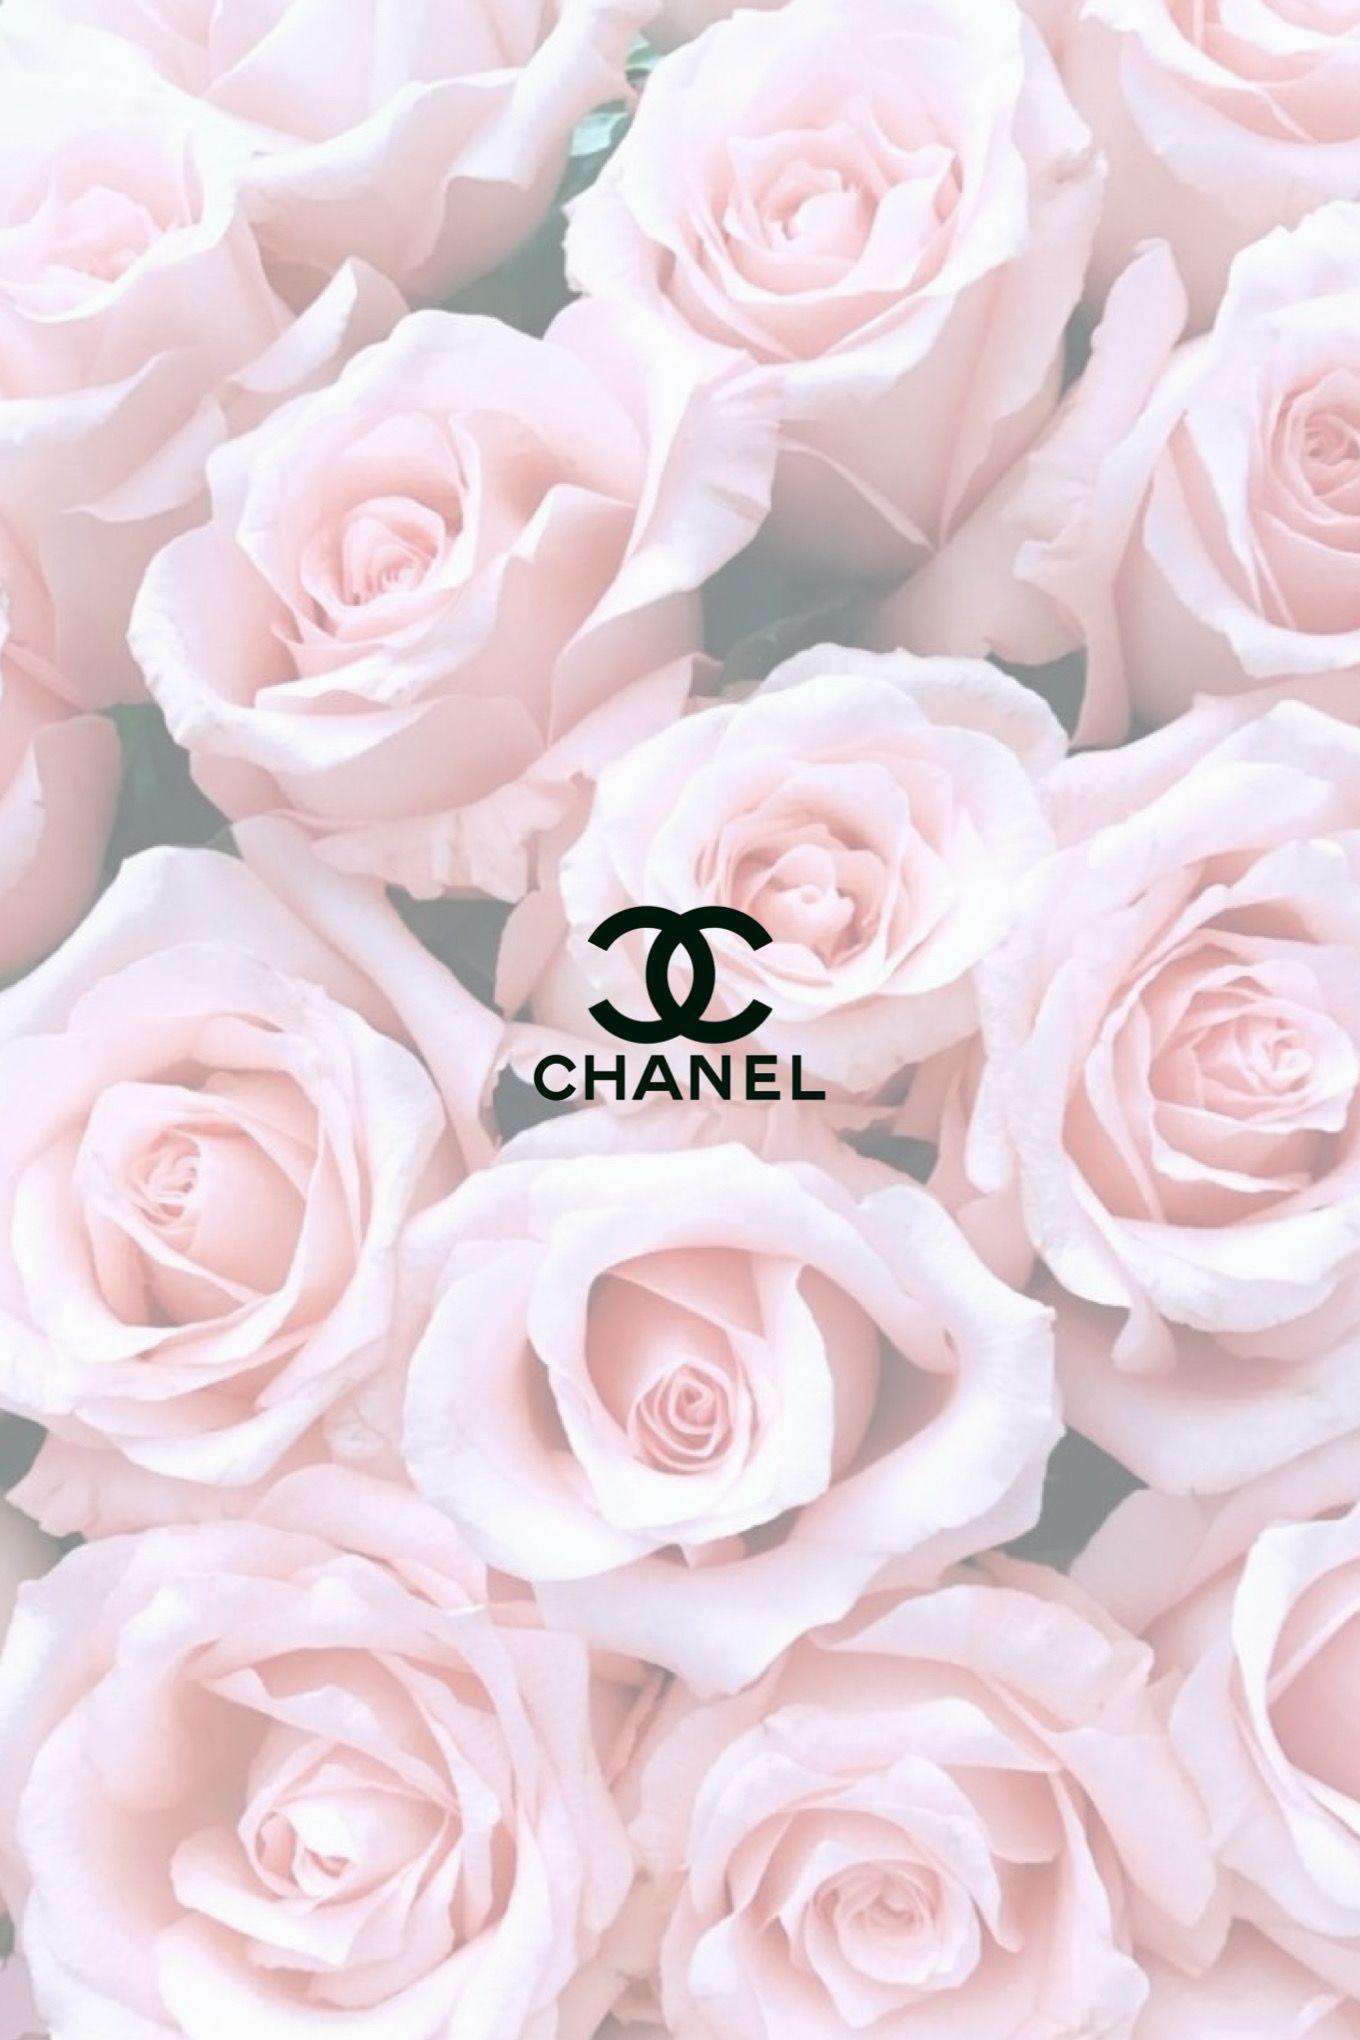 Chanel Roses Wallpapers Top Free Chanel Roses Backgrounds Wallpaperaccess